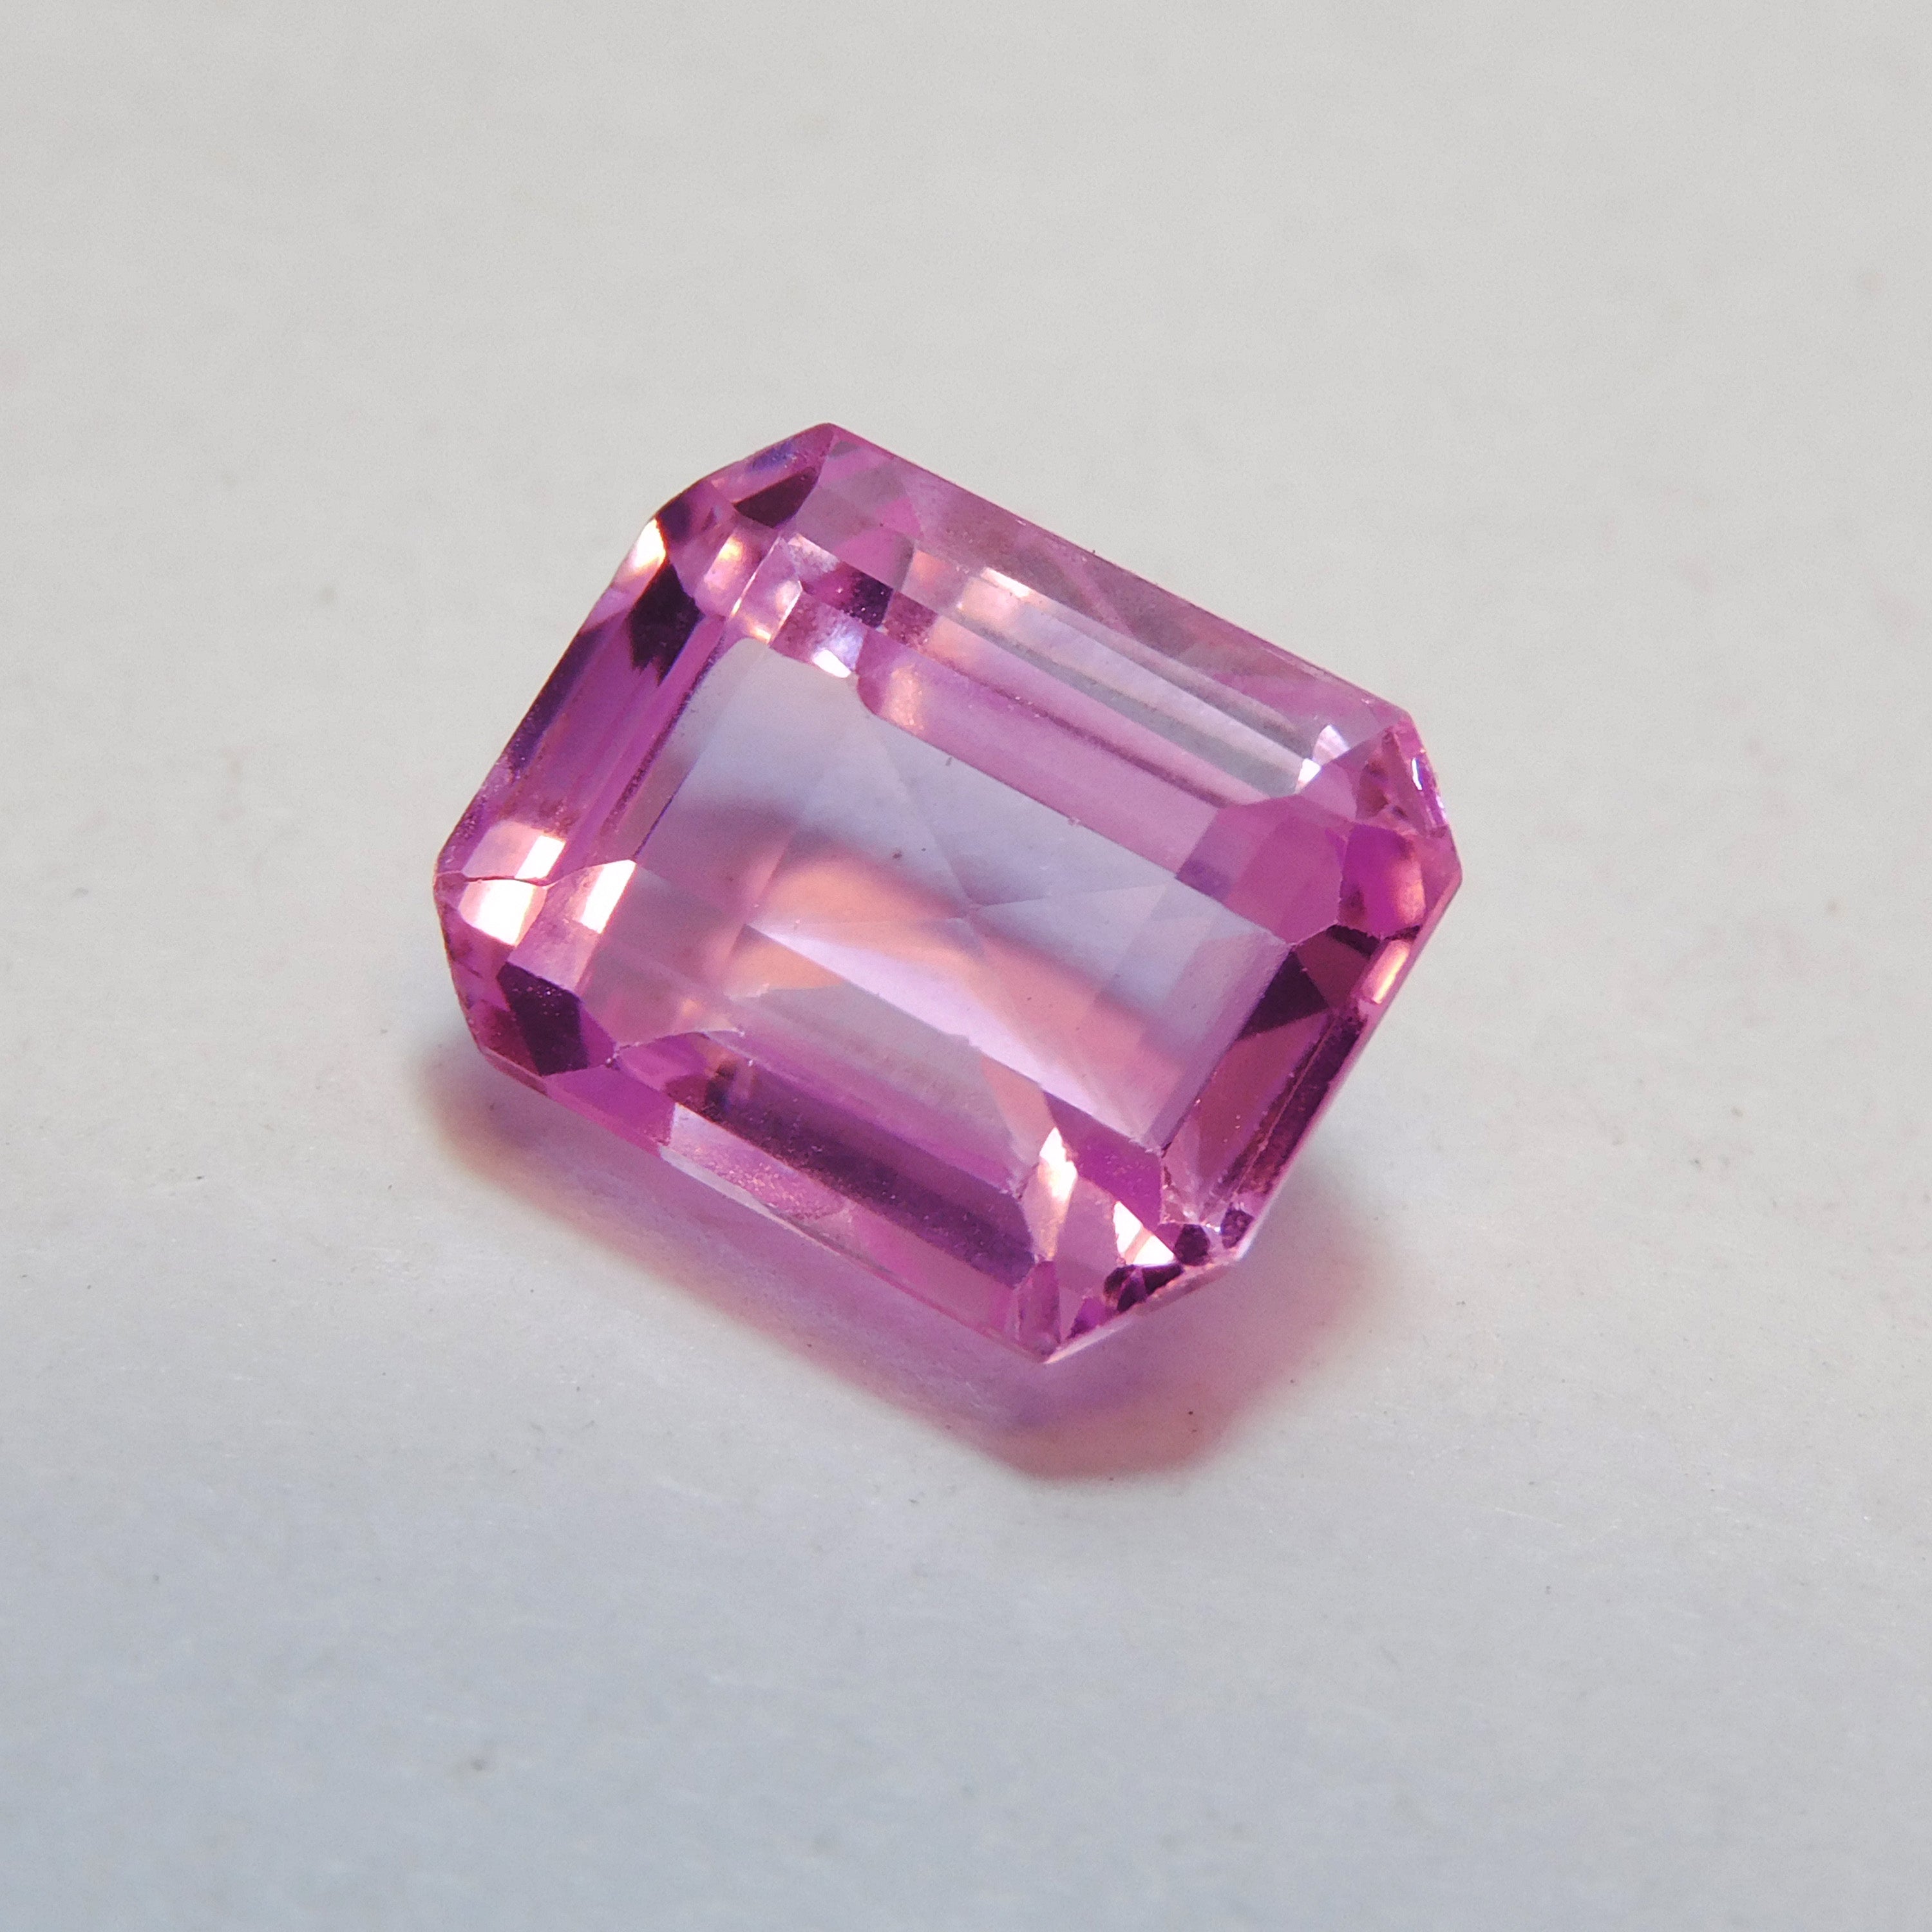 Purchase It !! Very  Beautiful Ring Making Gem !! 10.00 Ct Emerald Cut Natural Sapphire Light Pink Certified Loose Gemstone Gift For Her/ Him